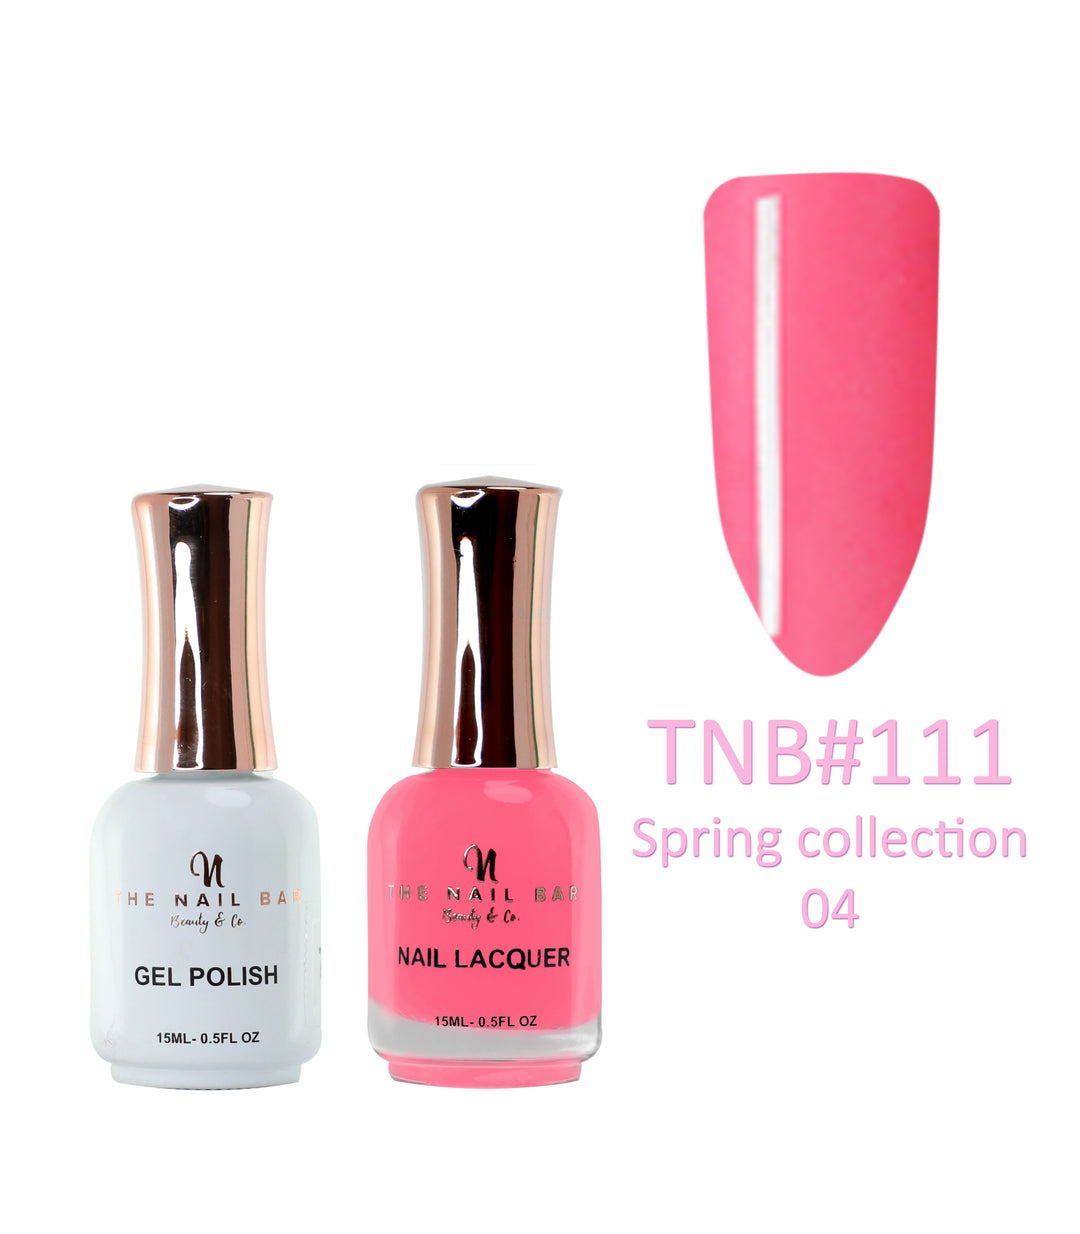 Dual Polish/Gel colour matching (15ml) - Spring collection 04